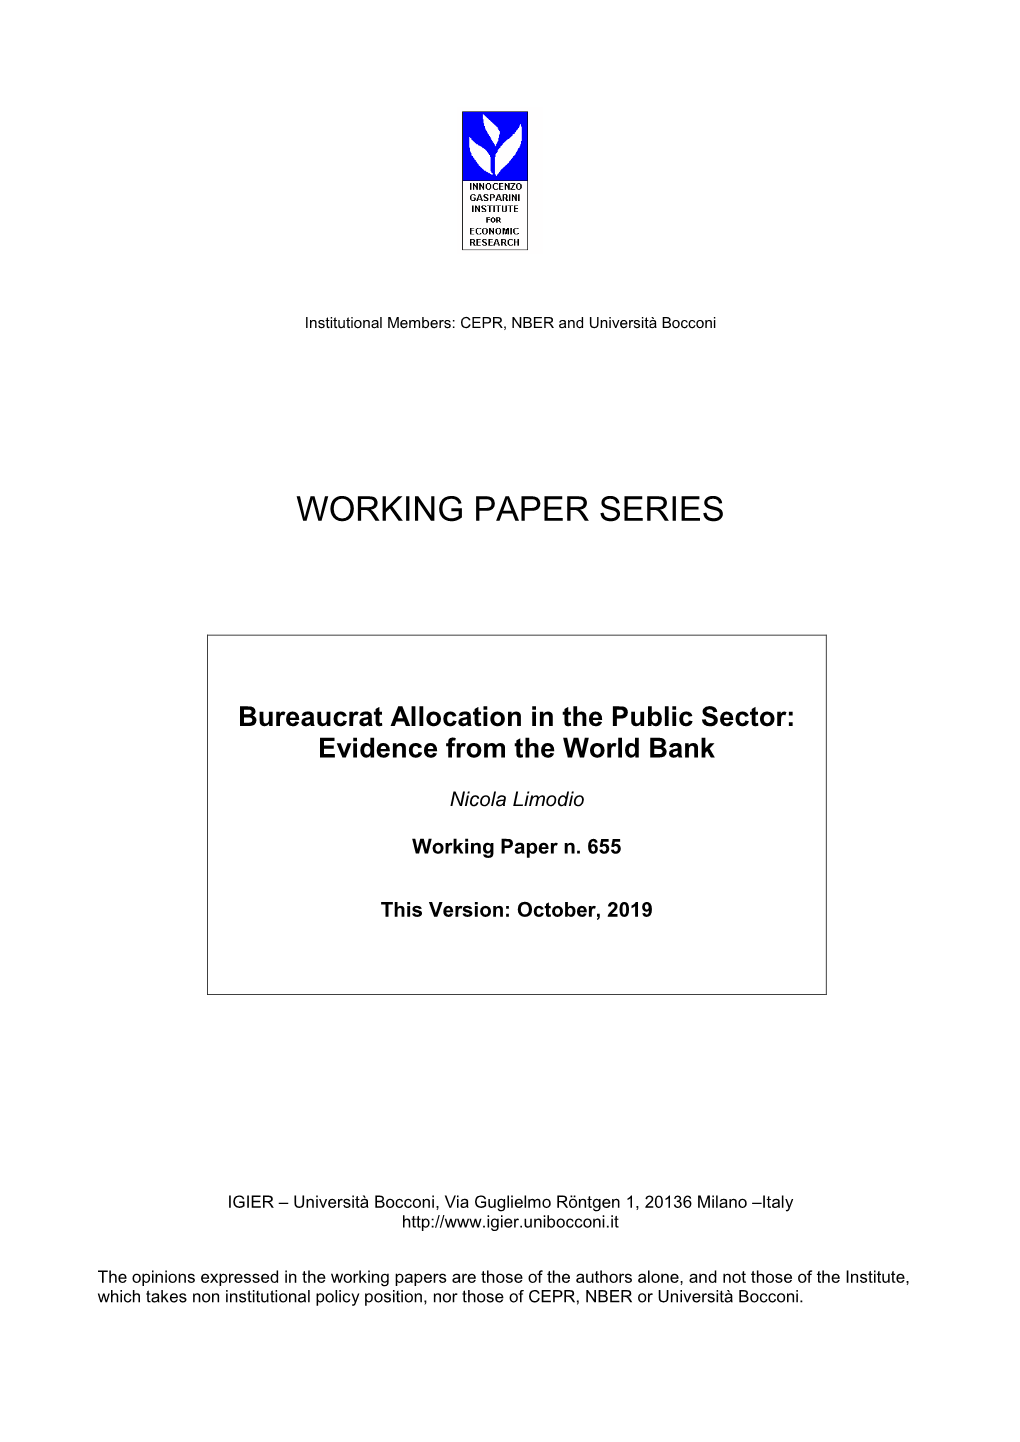 Bureaucrat Allocation in the Public Sector: Evidence from the World Bank